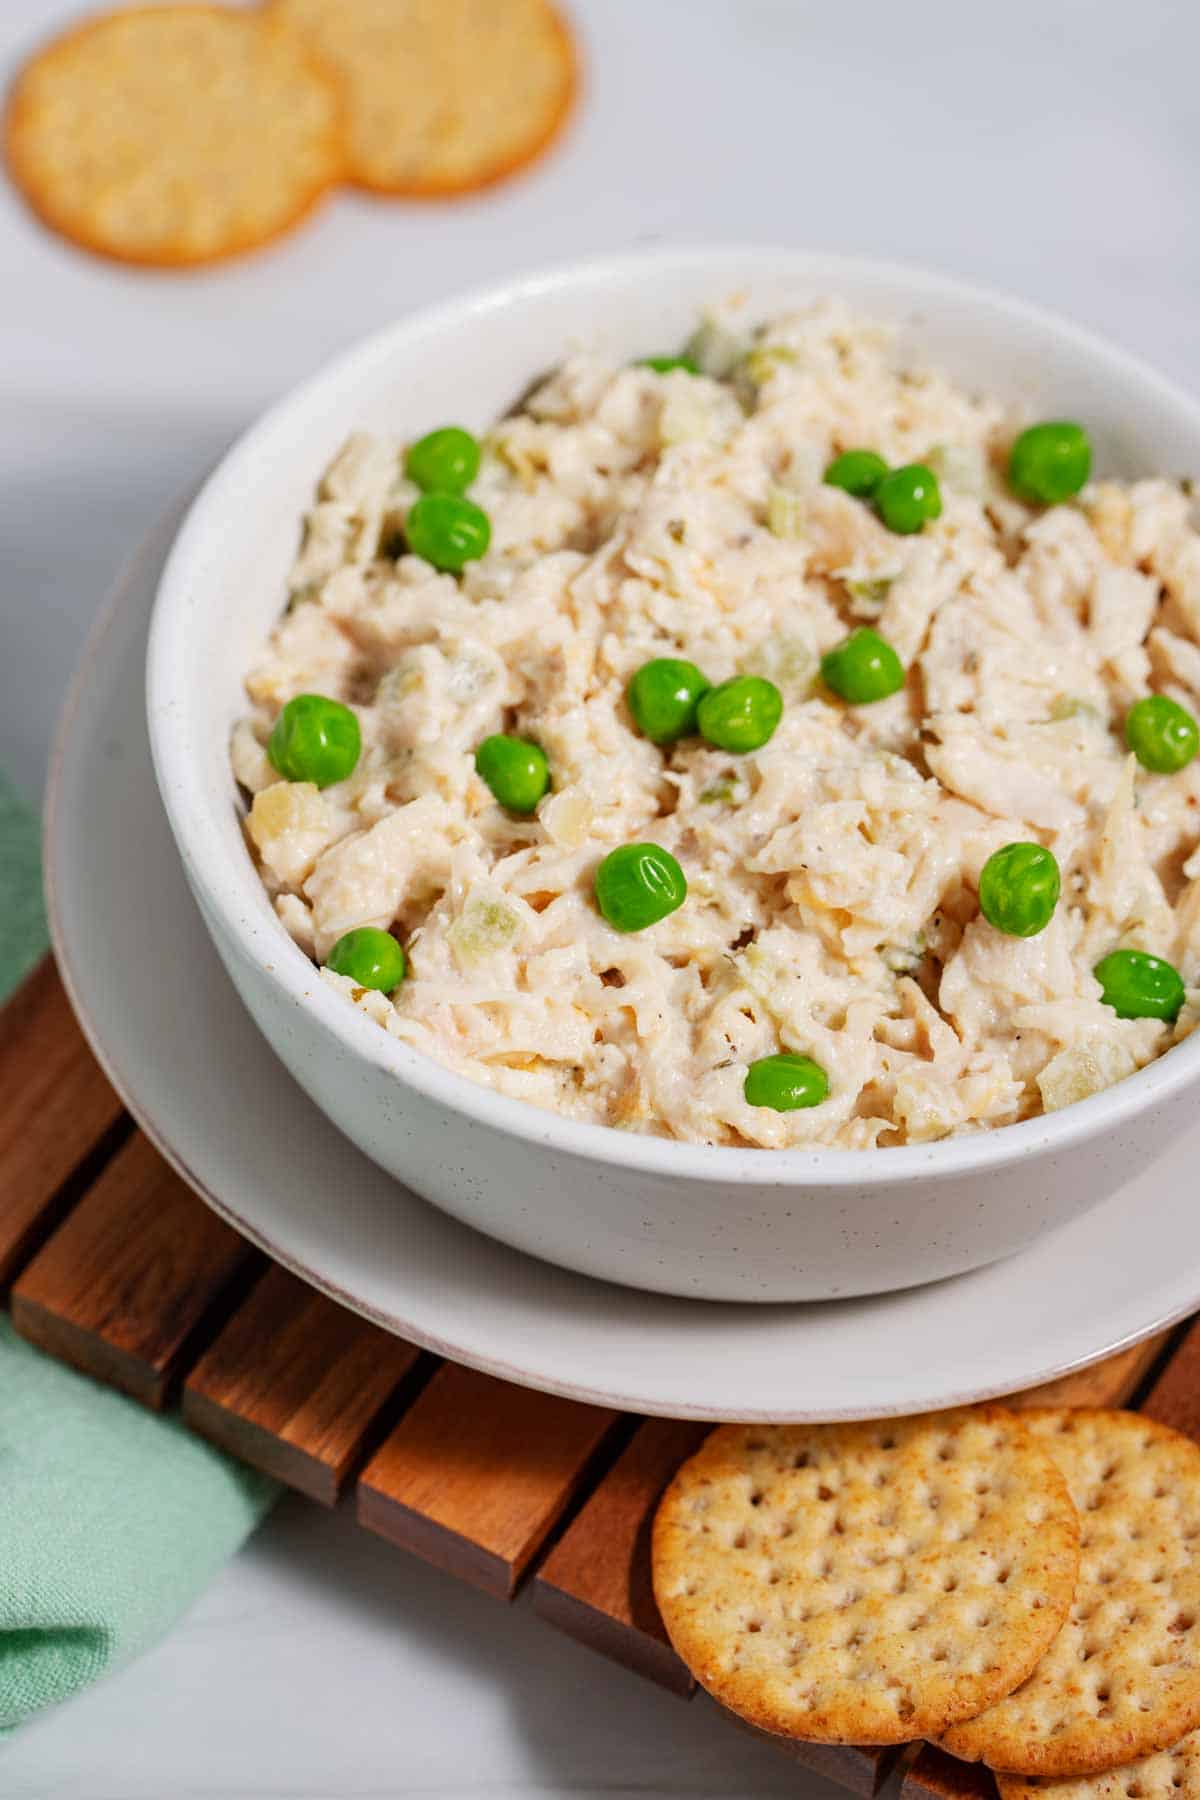 Store-bought chicken salad with peas added to improve the taste.